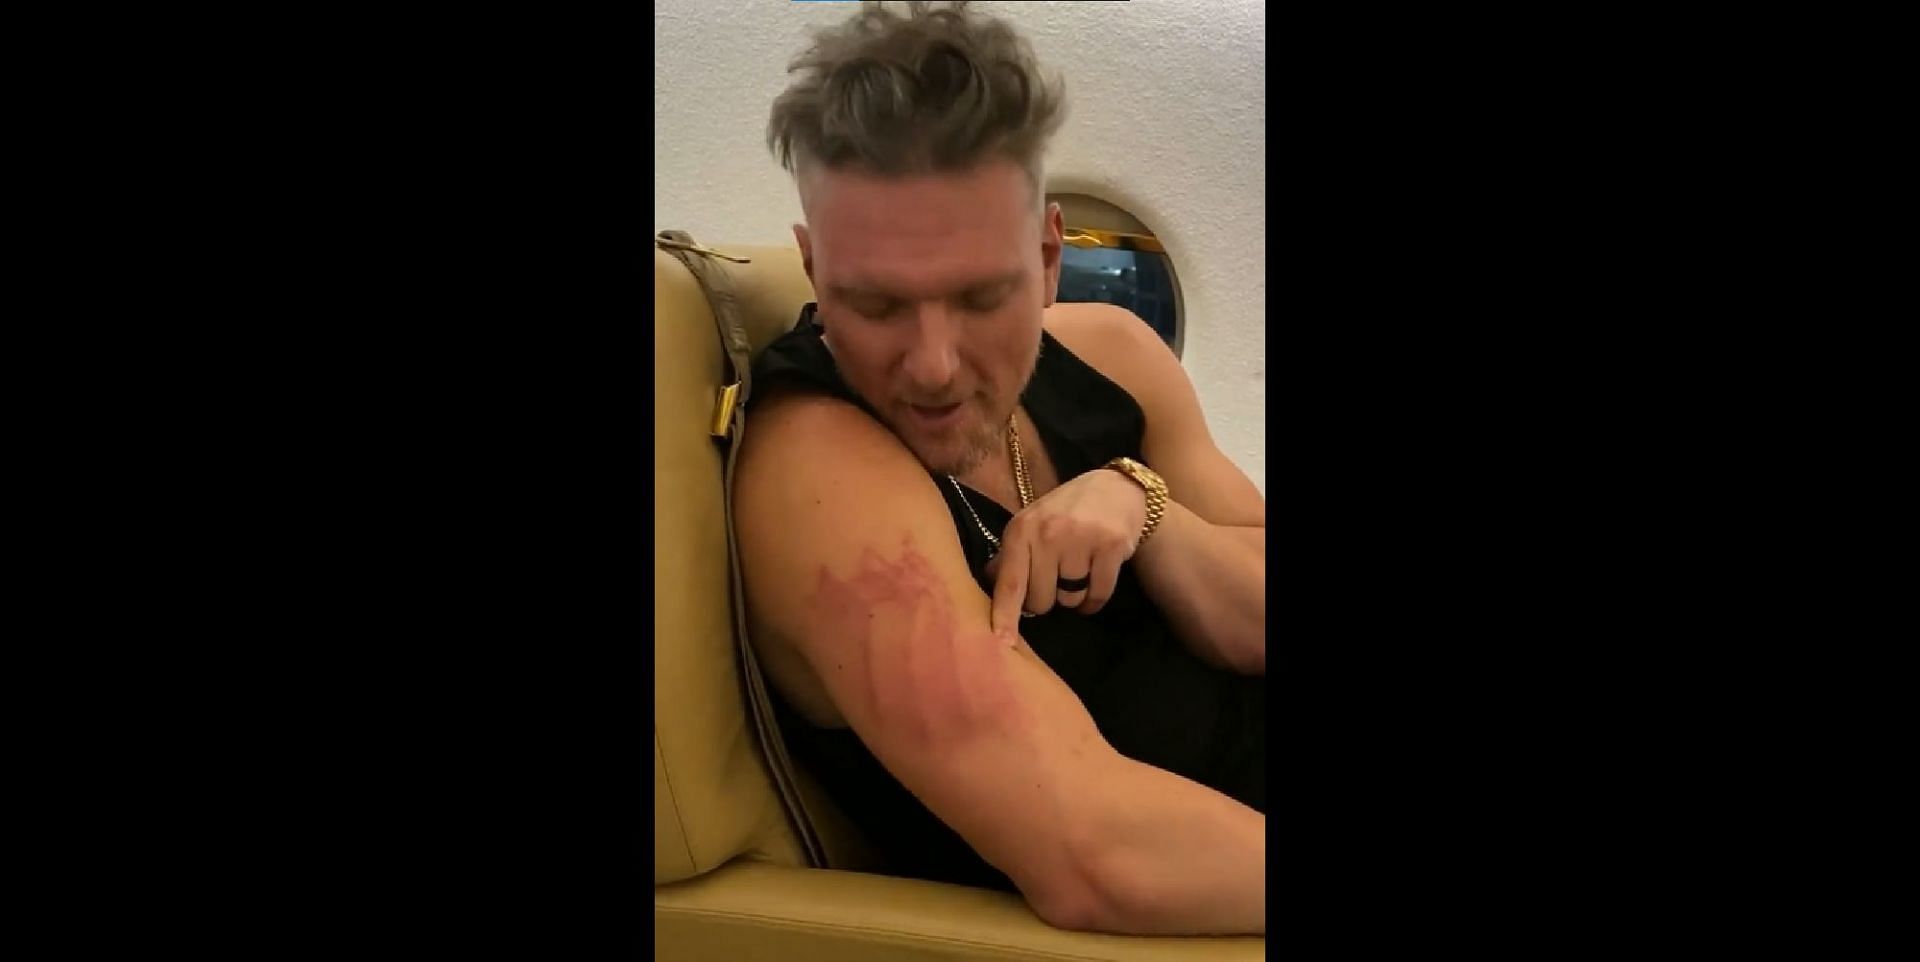 The show host on the plane after his fight - Credit: @MrsMcAfeeShow on Twitter